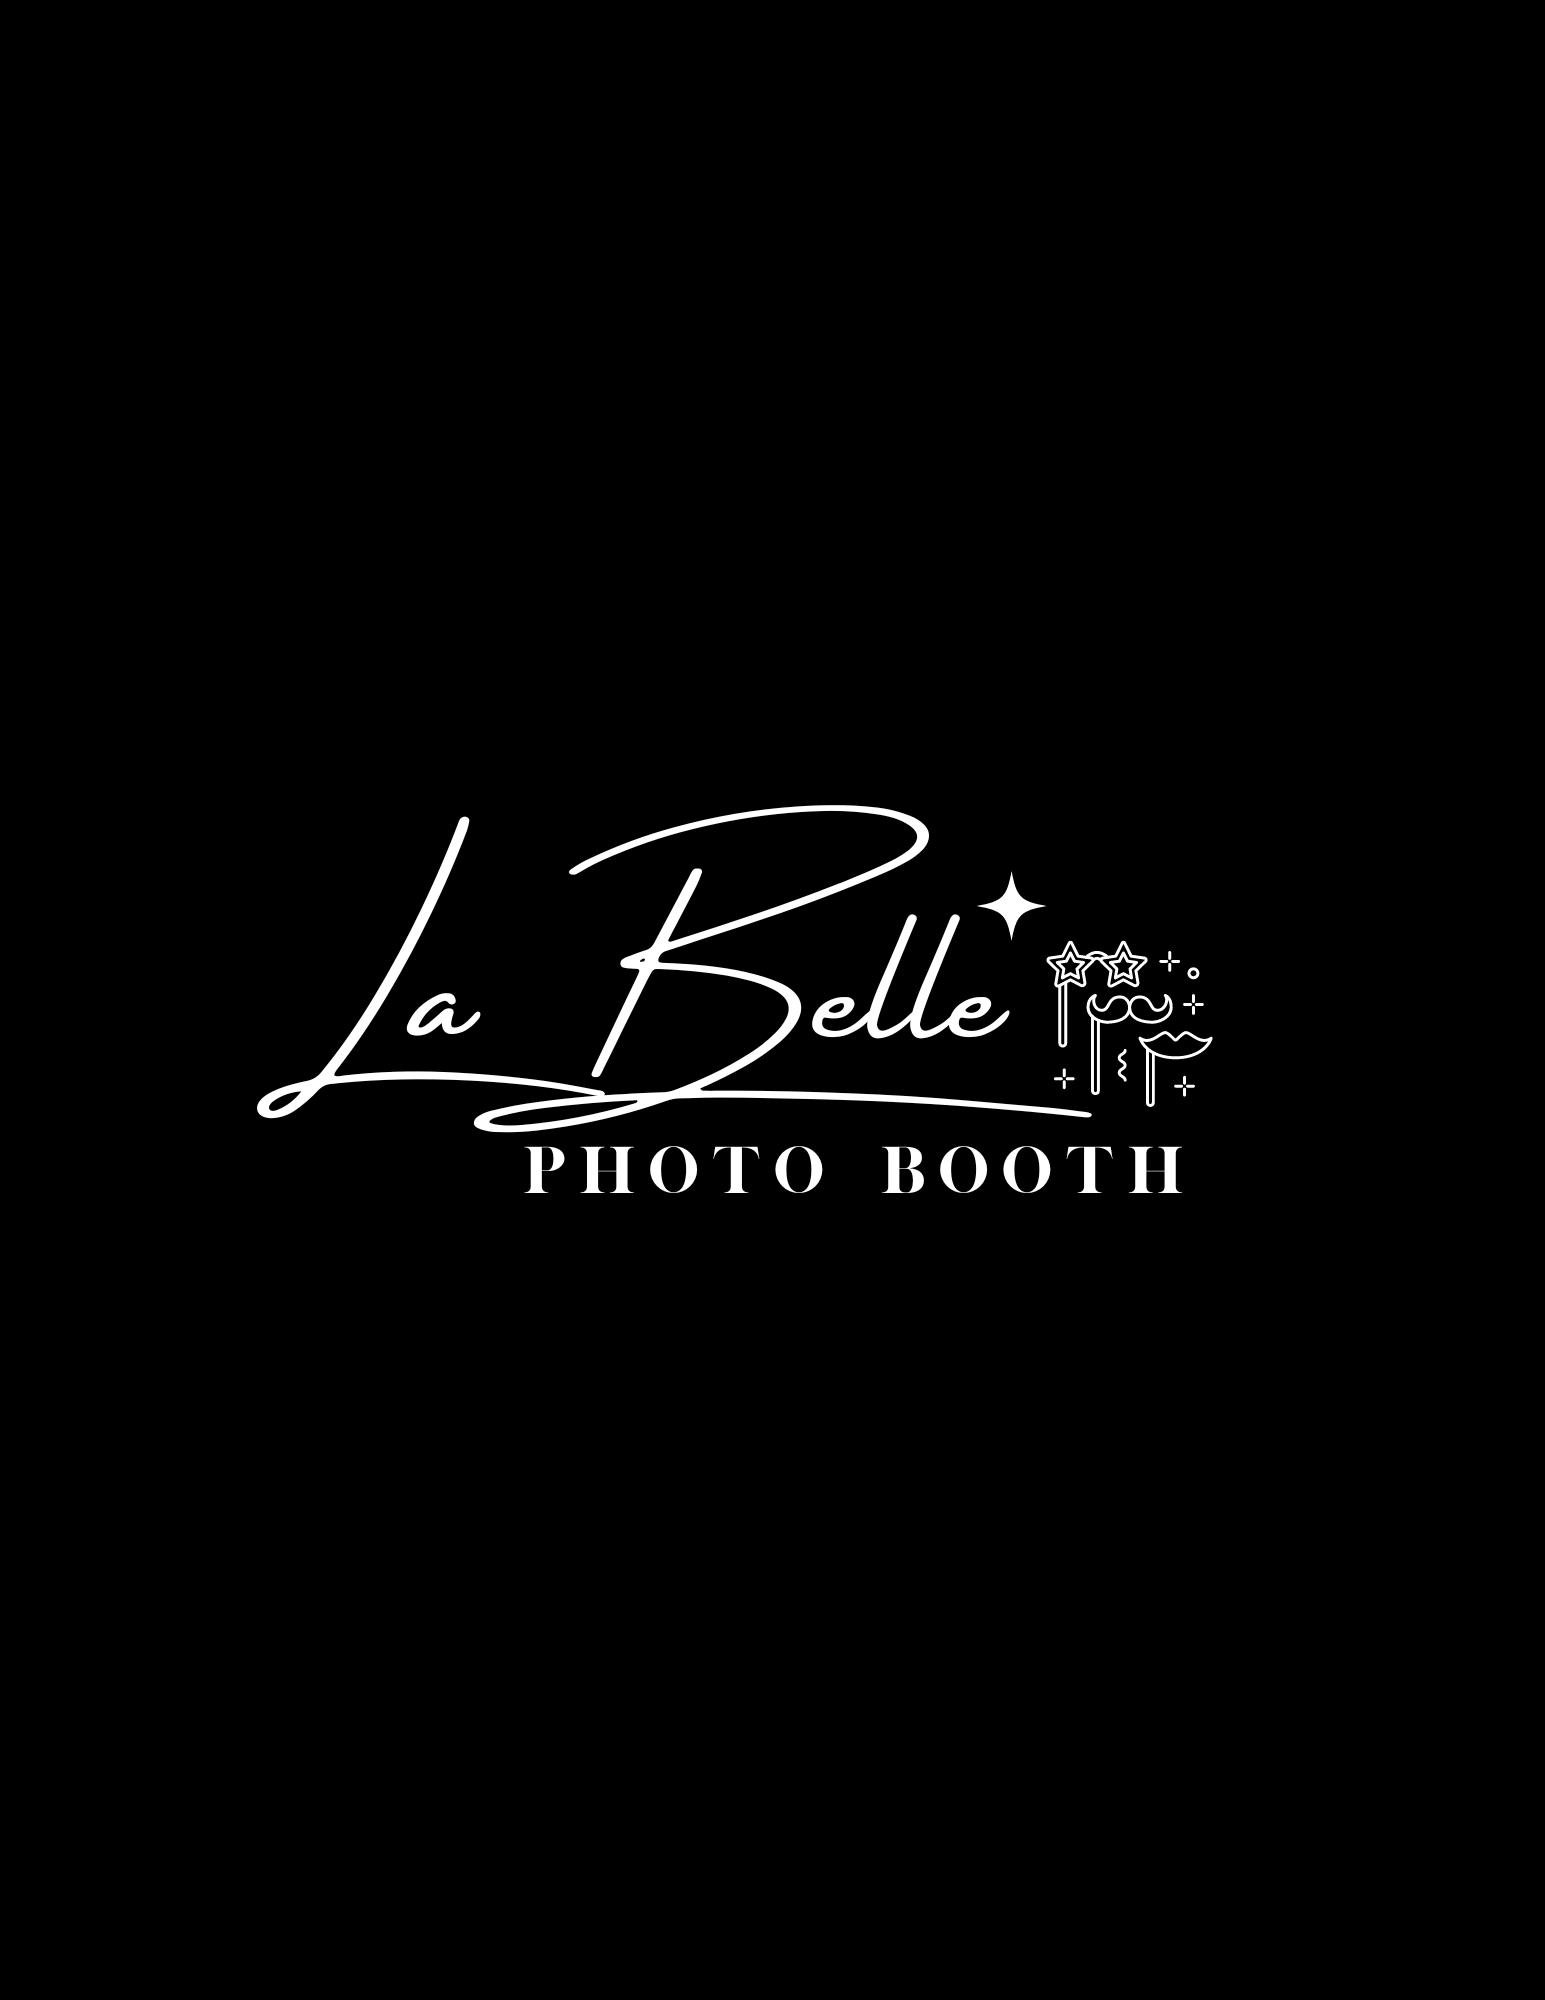 LaBelle Photo Booth